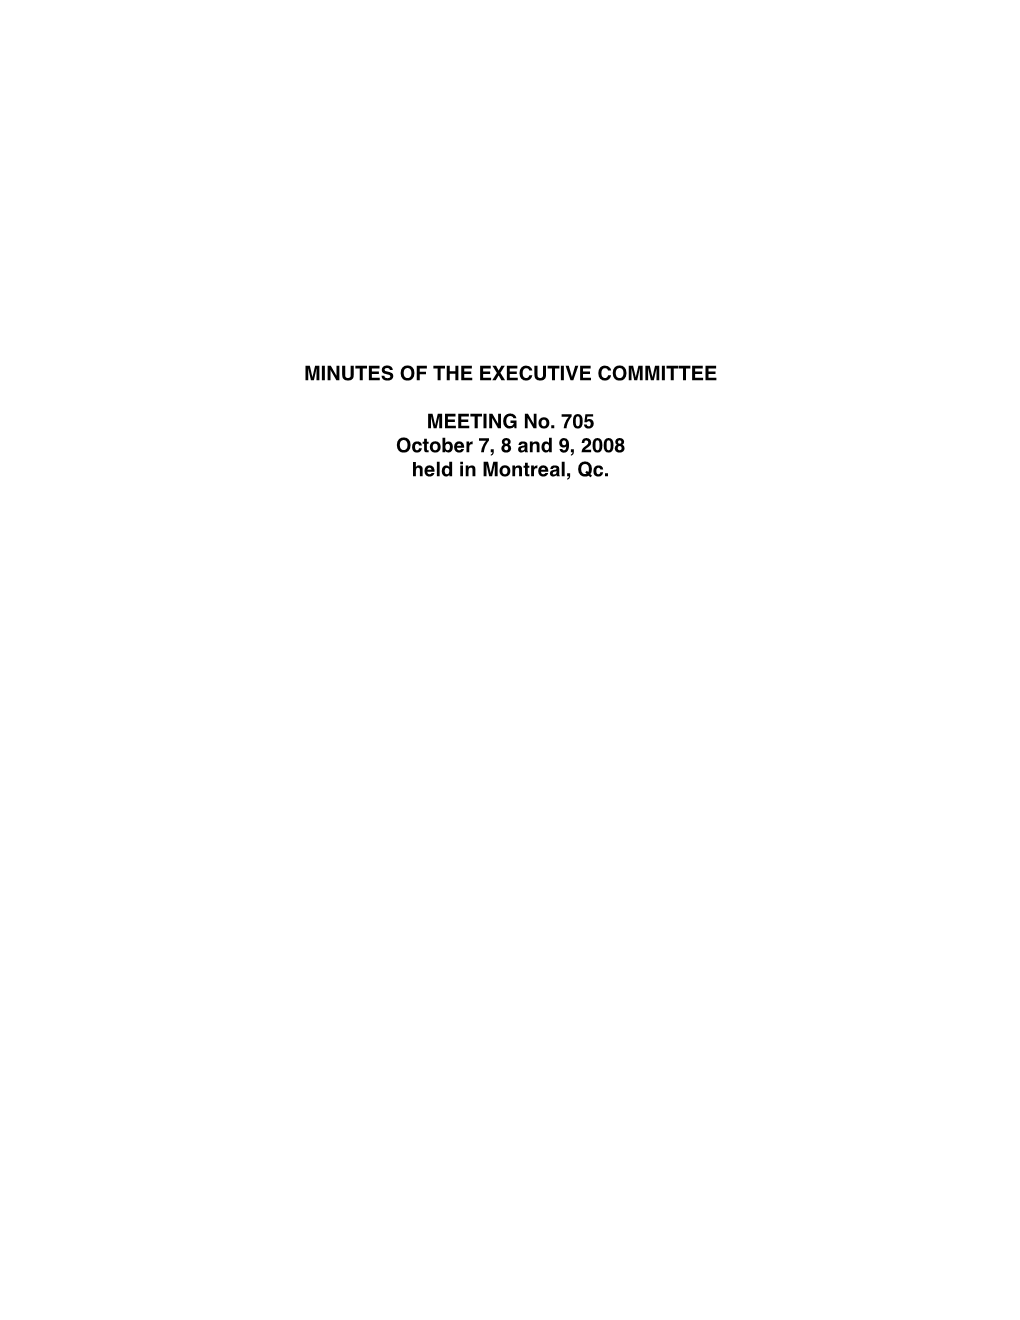 MINUTES of the EXECUTIVE COMMITTEE MEETING No. 705